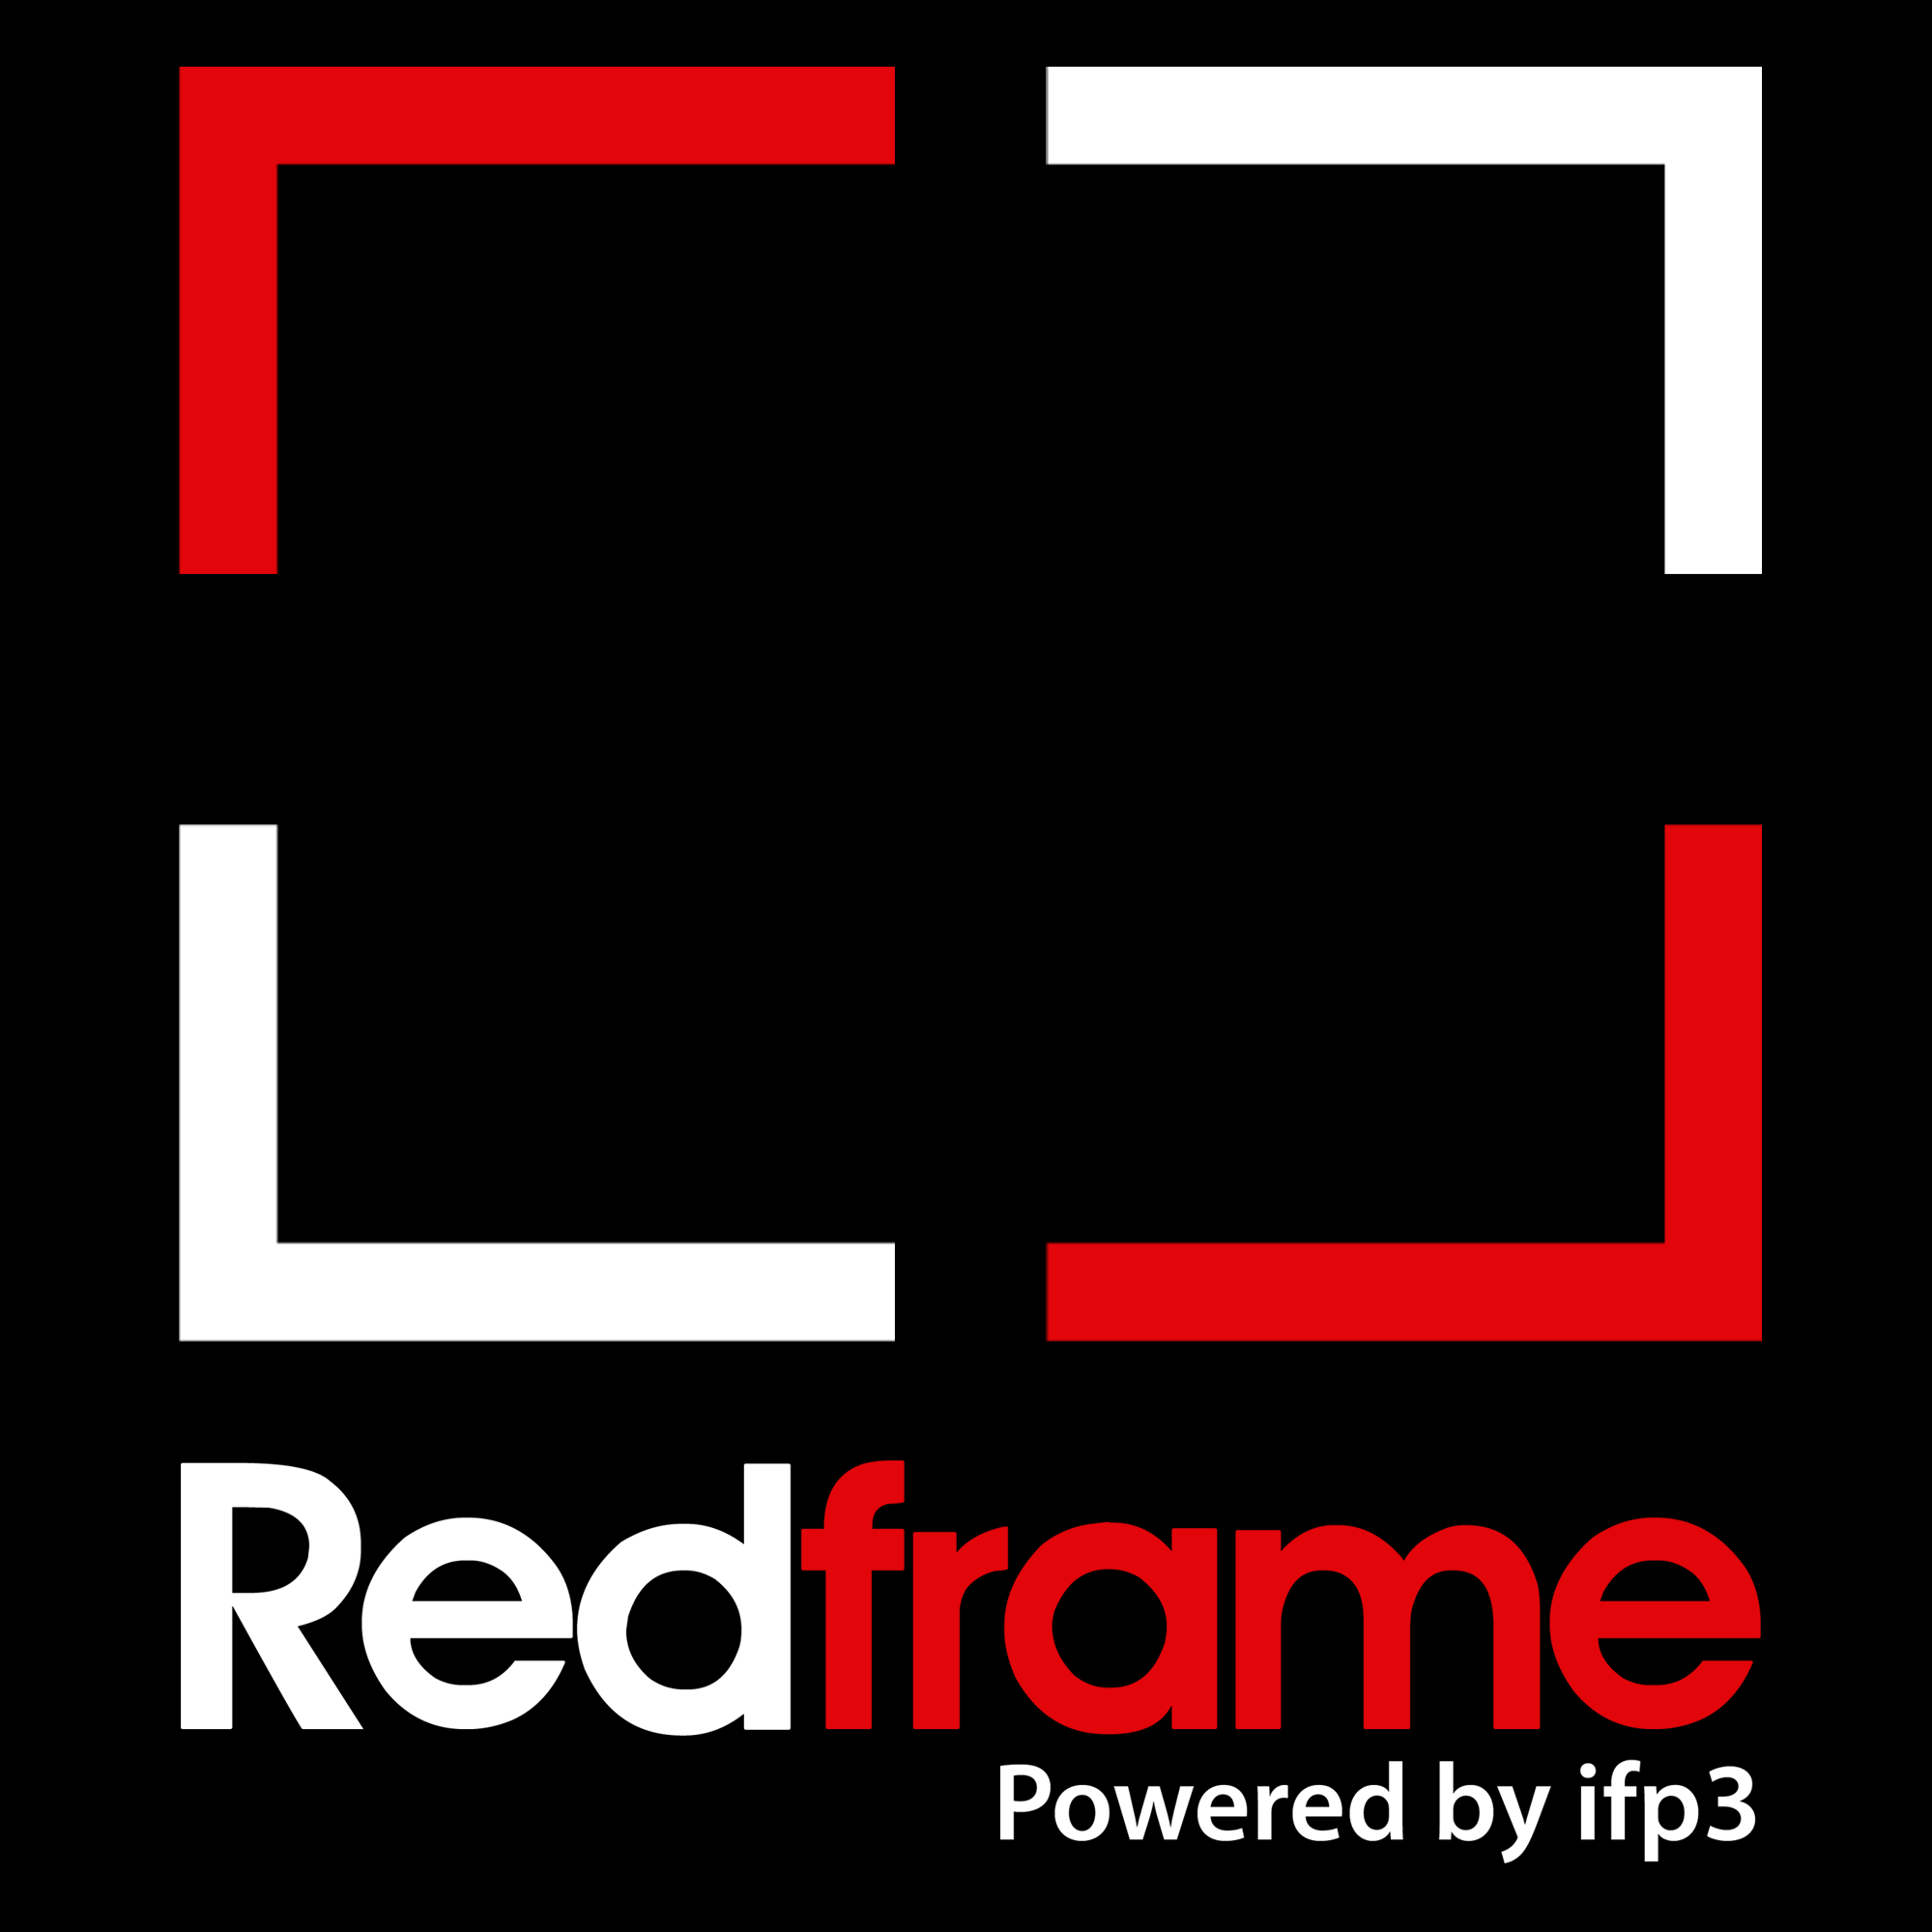 Square Black with Red Rectangle Logo - Photography Websites with Portfolio, Customization, Shopping Cart ...